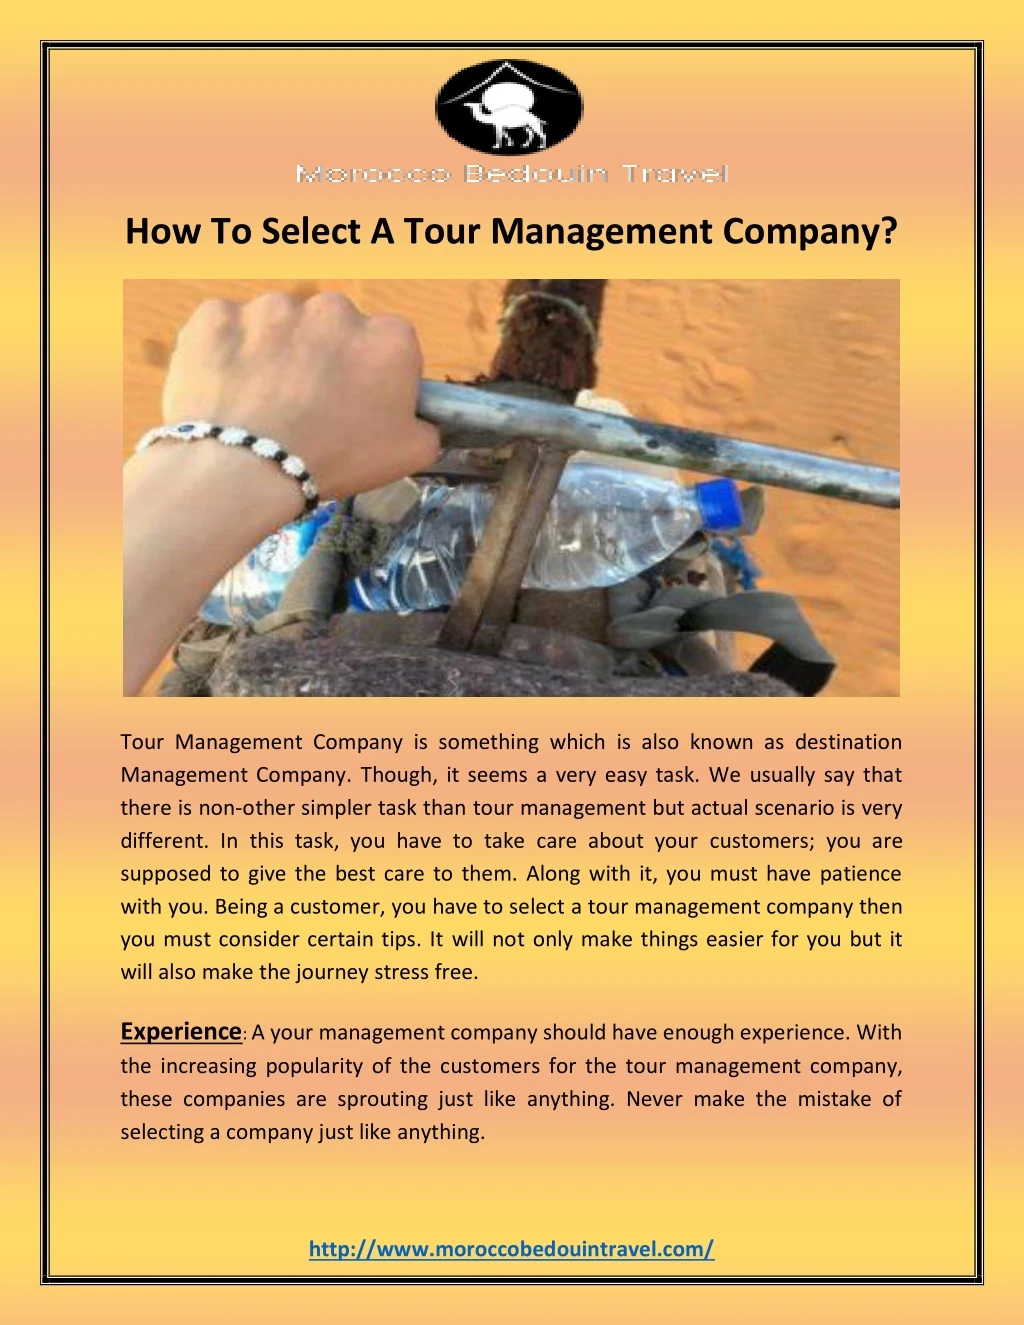 how to select a tour management company